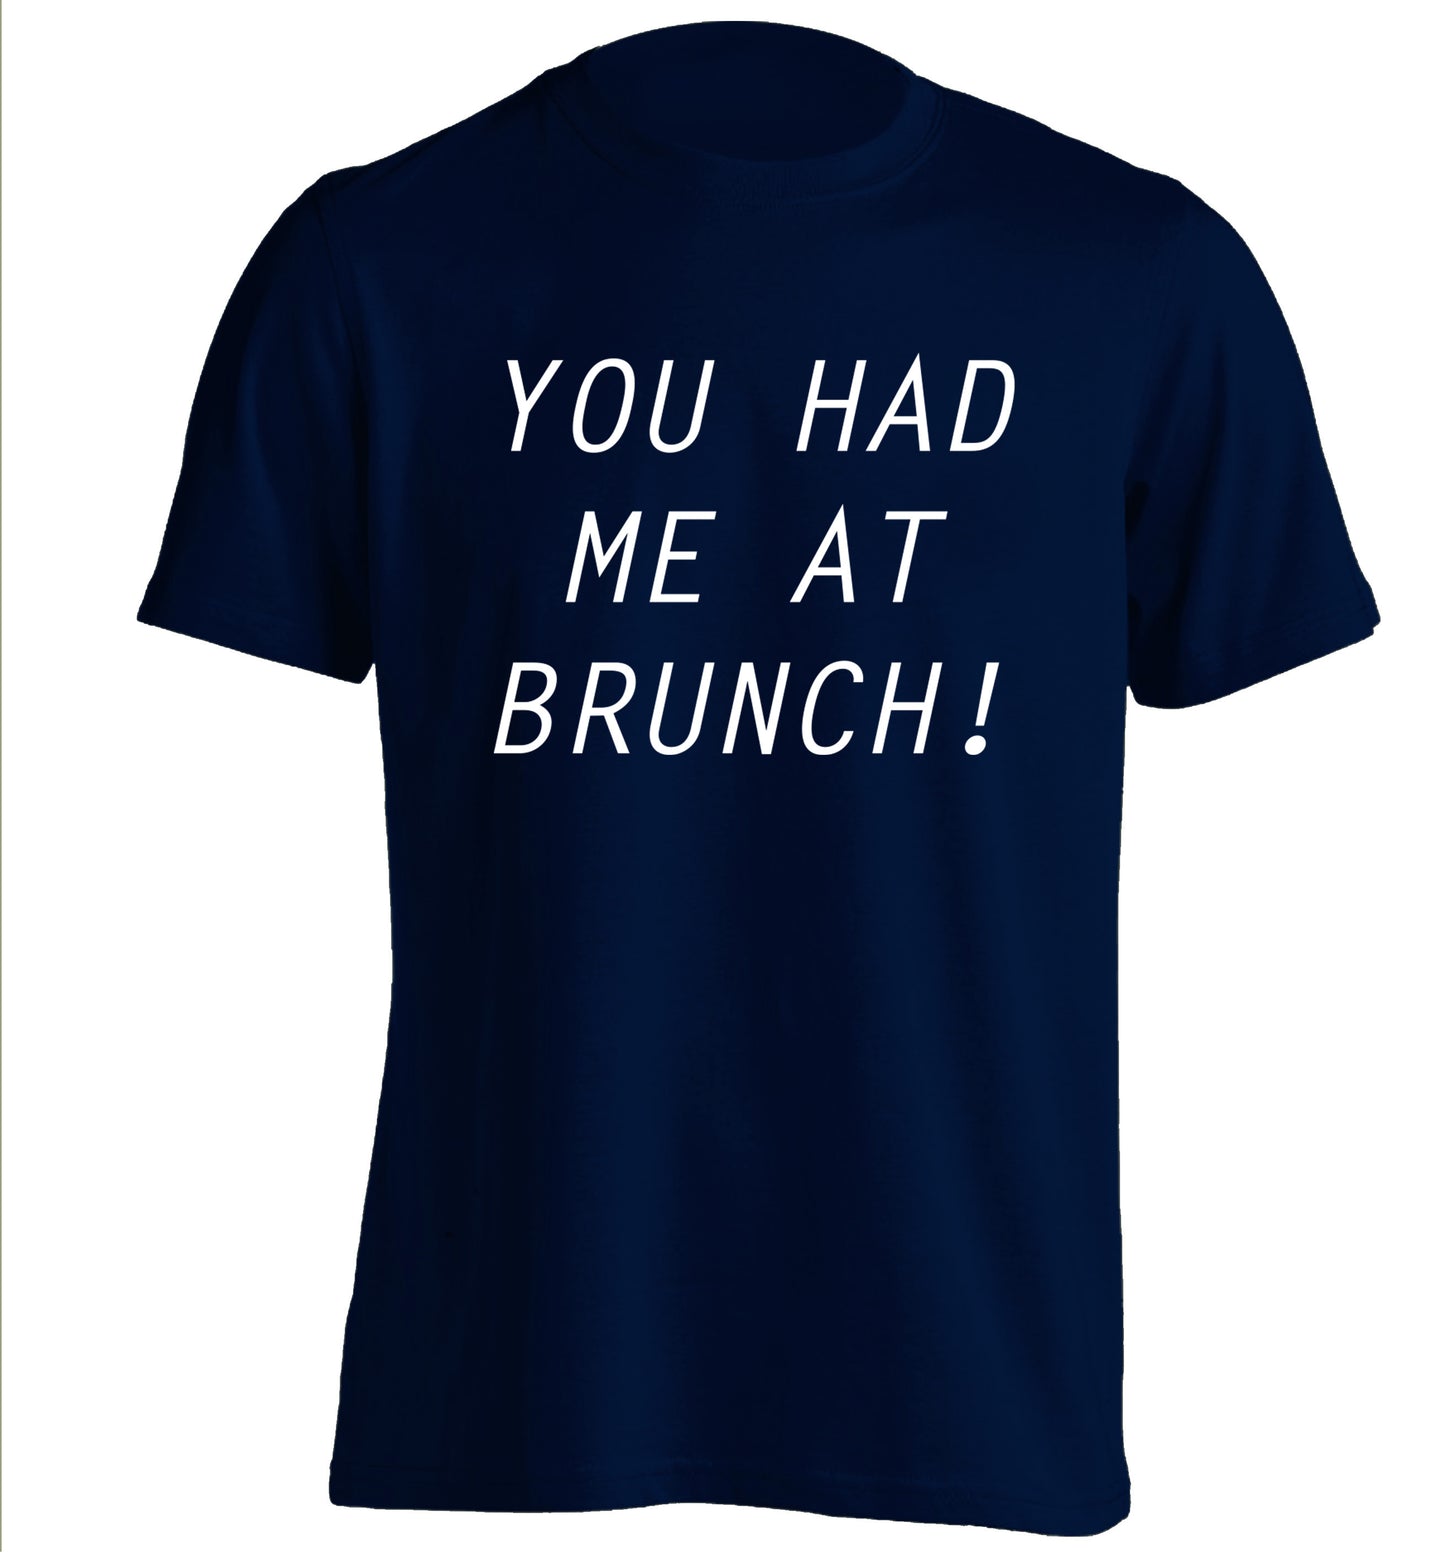 You had me at brunch adults unisex navy Tshirt 2XL